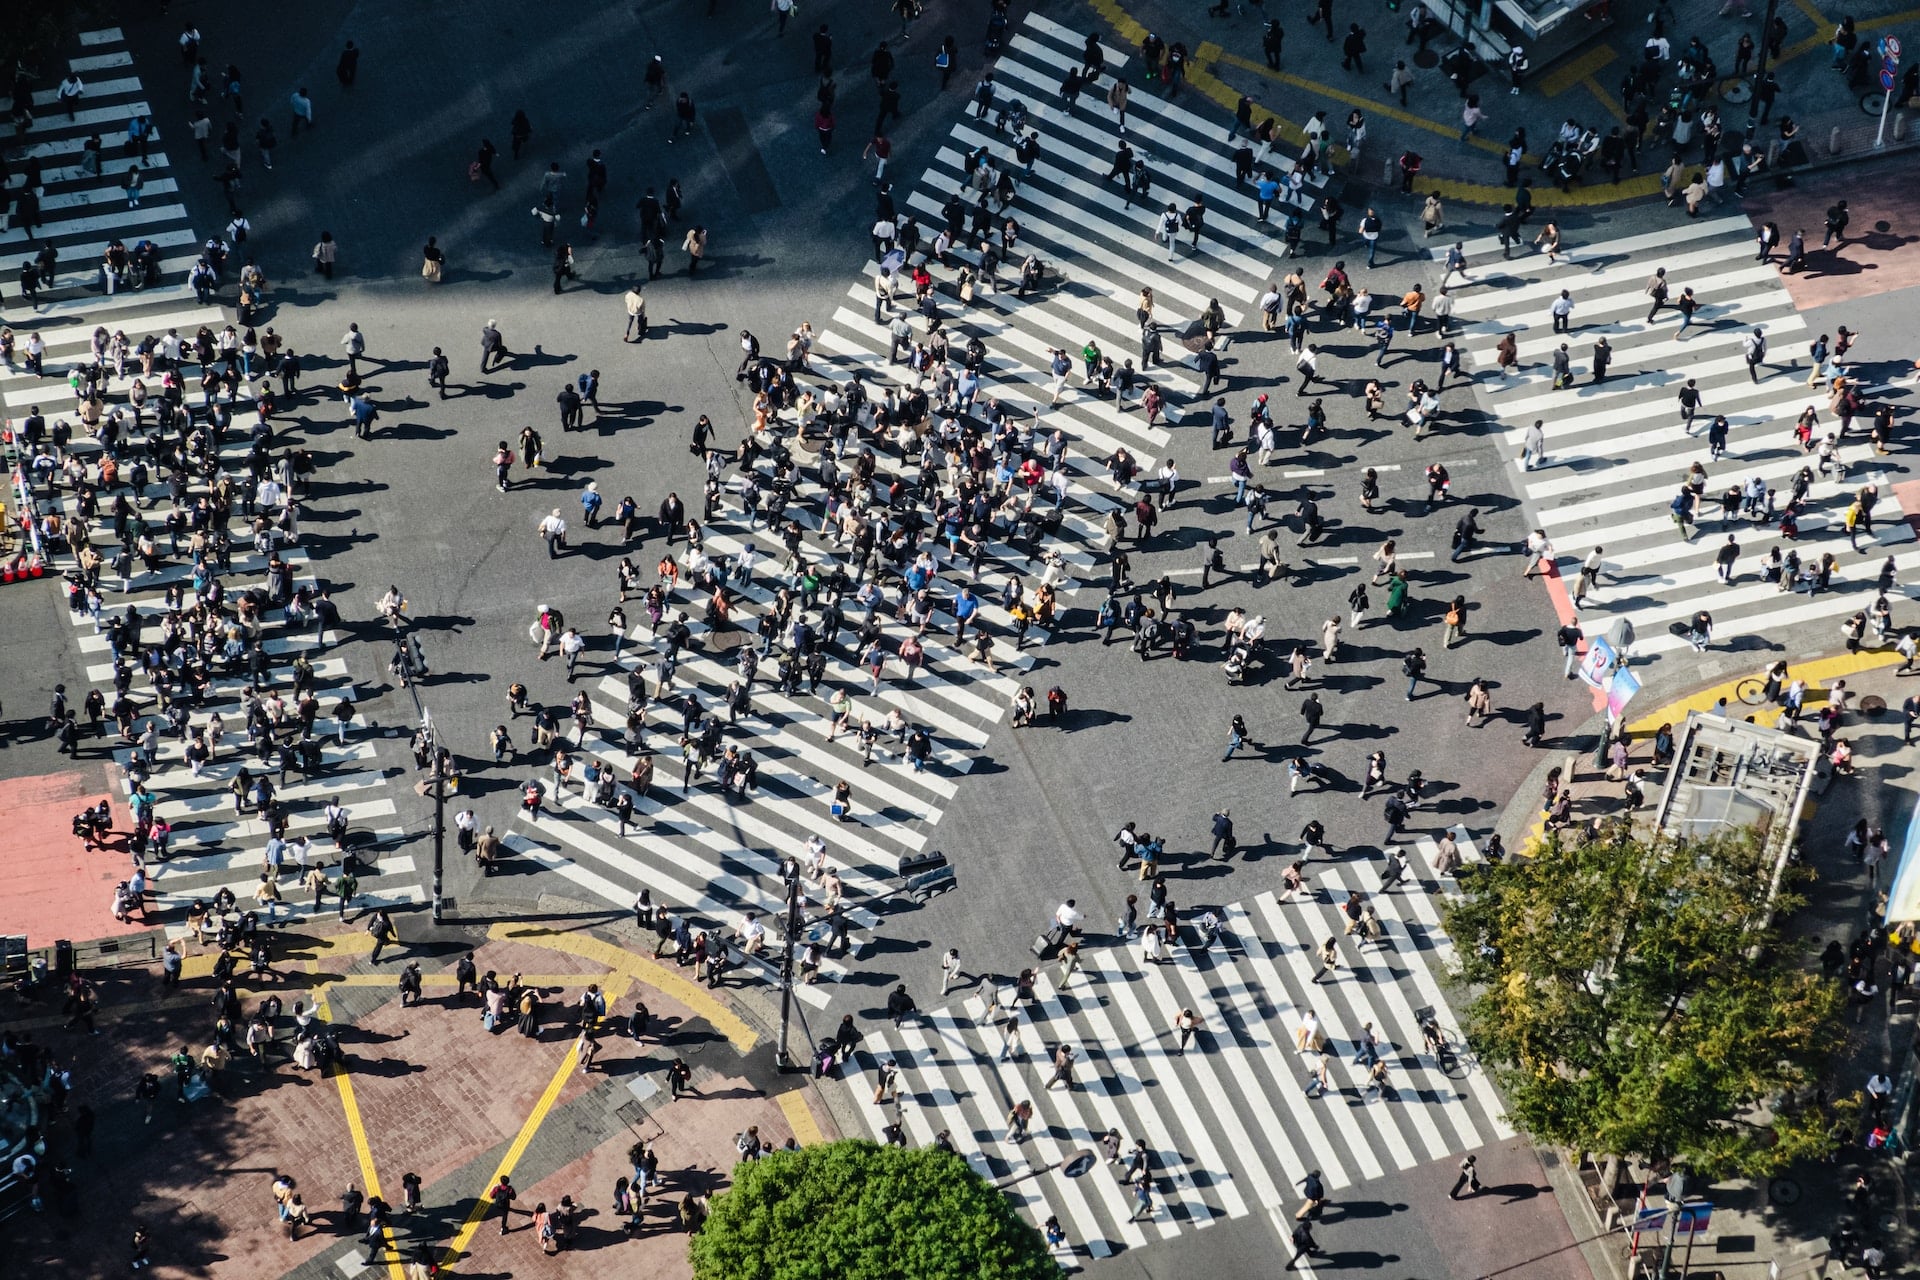 Famous for its iconic pedestrian crossing, Shibuya is one of Tokyo's most exciting areas